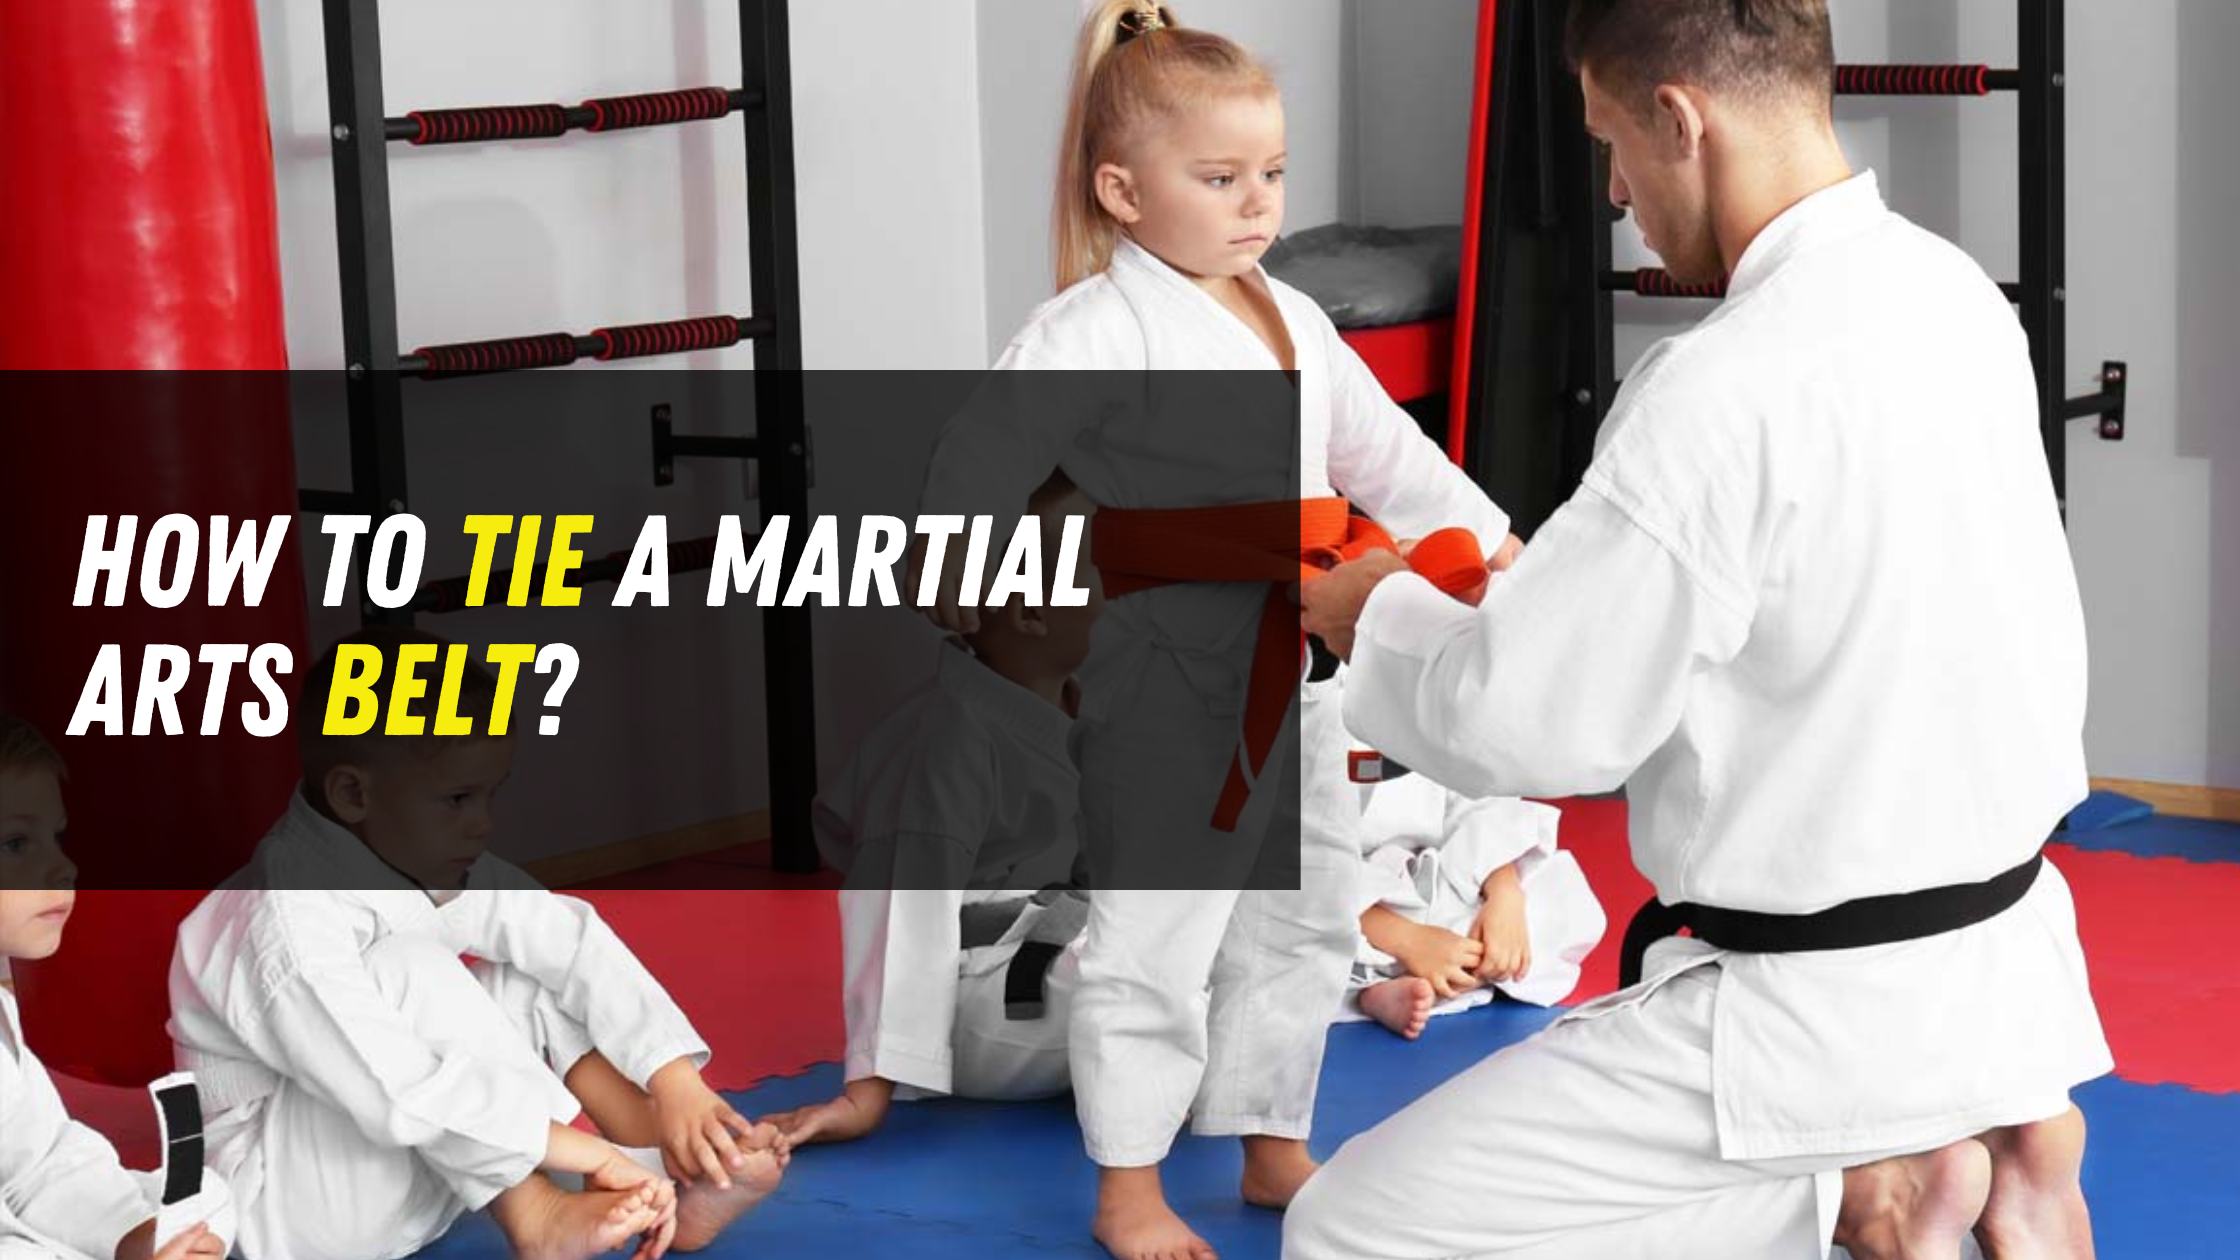 How to Tie a Martial Arts Belt?